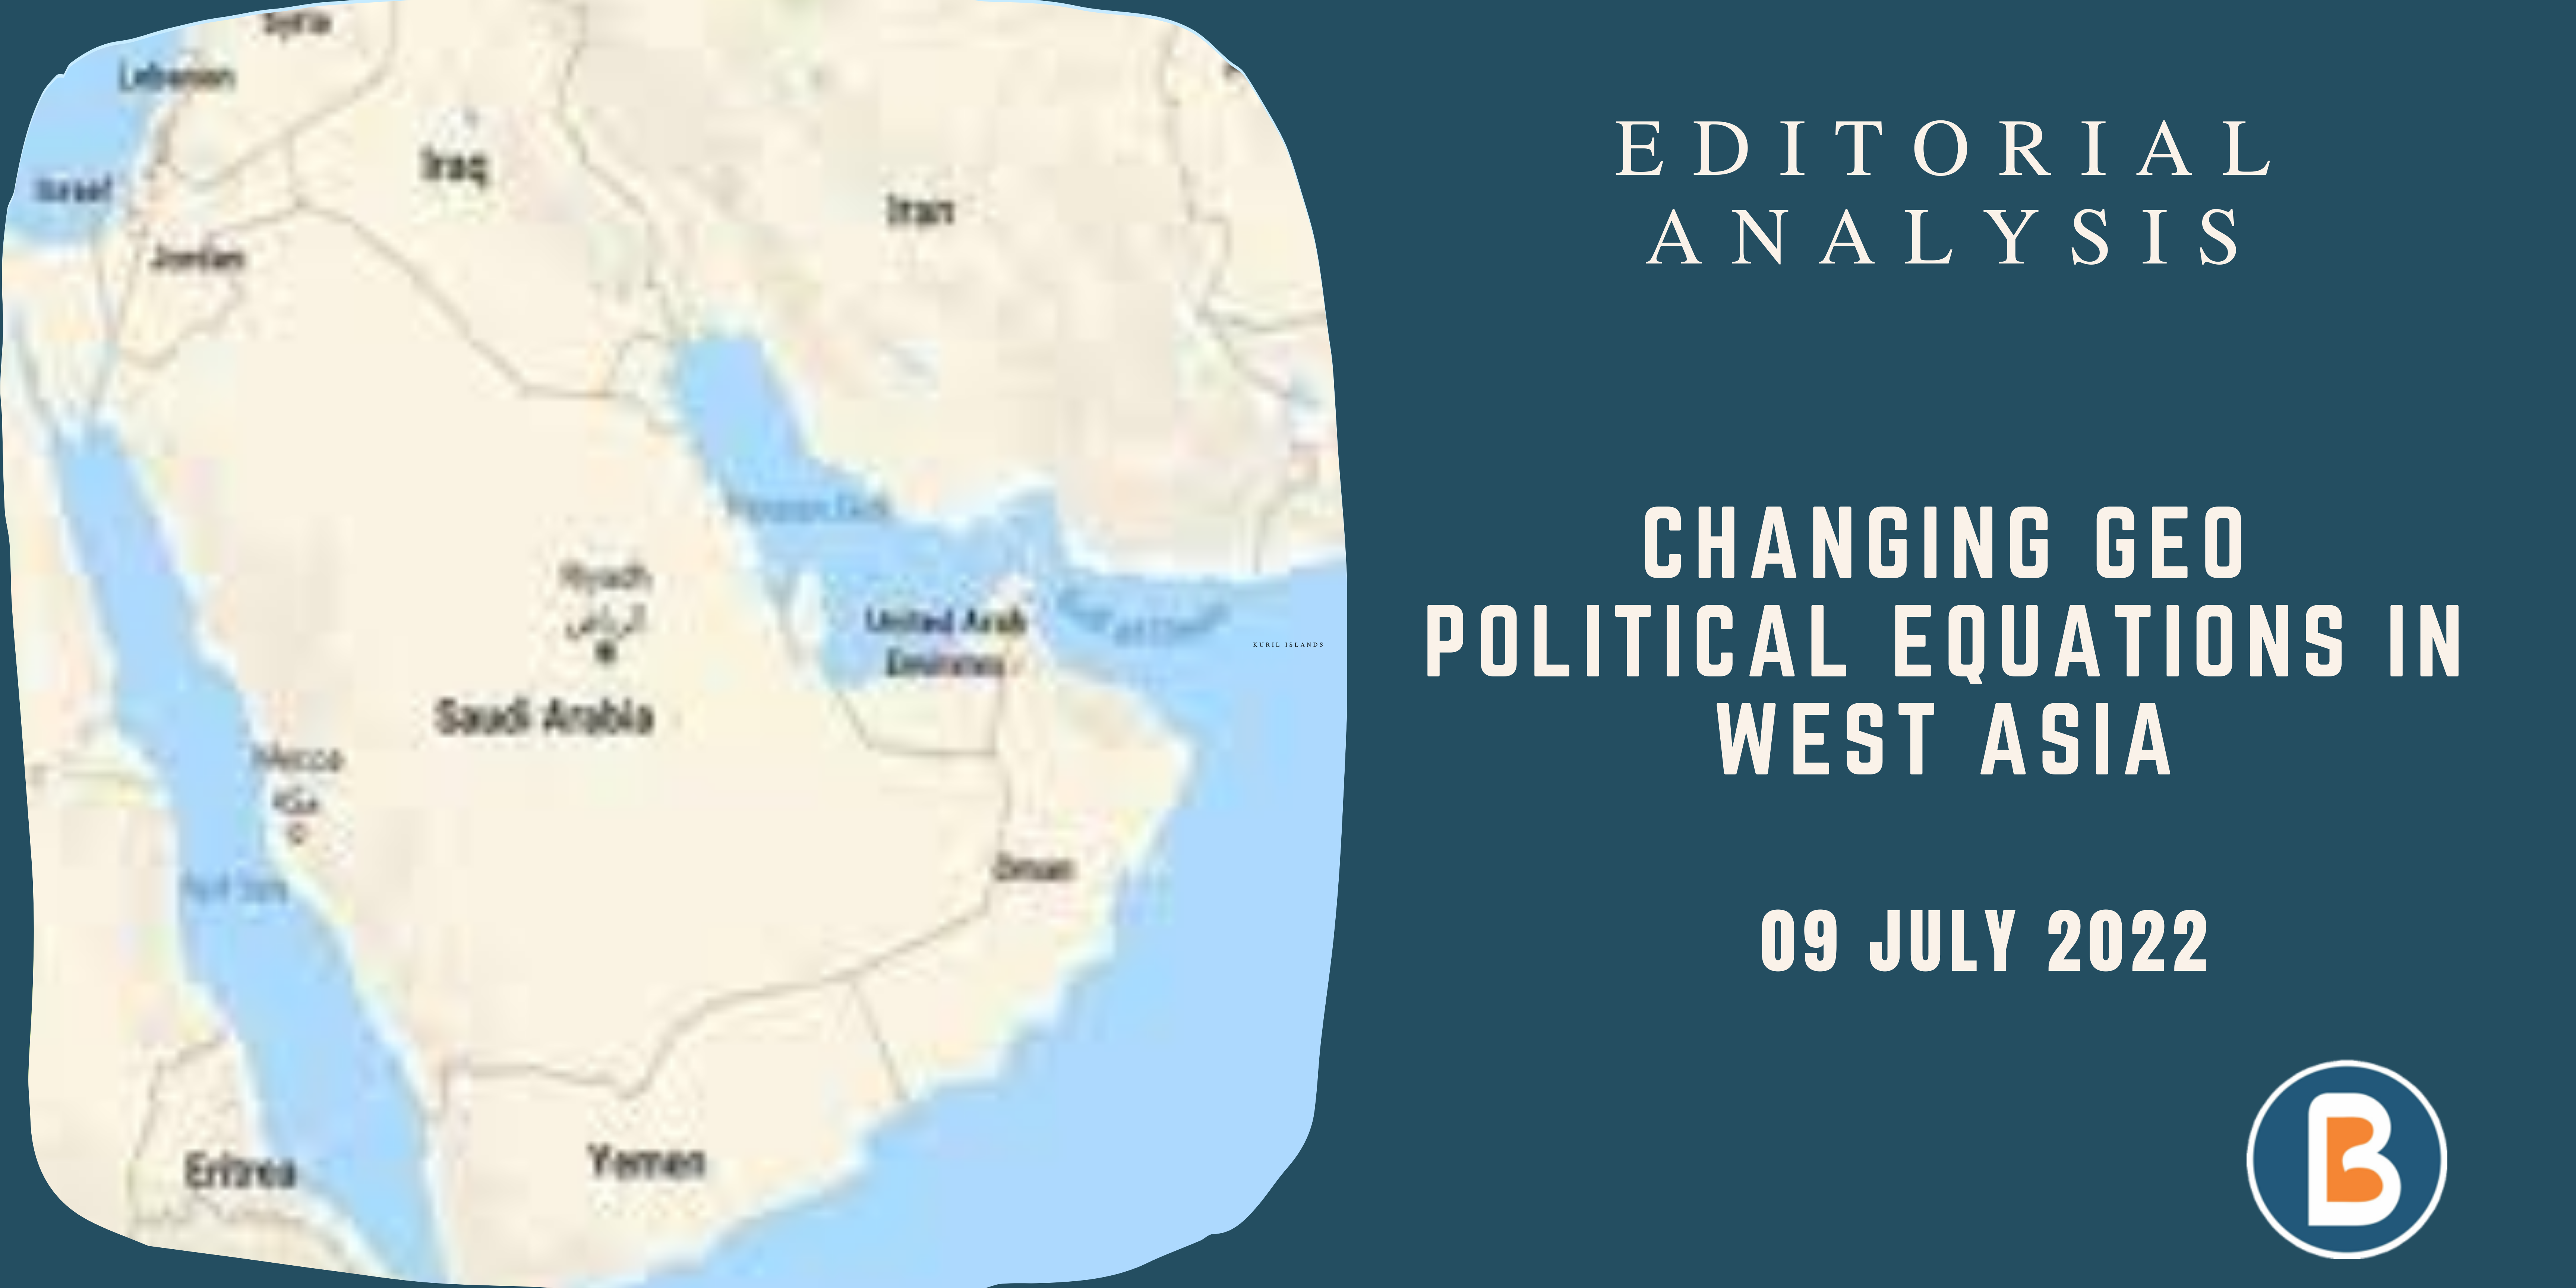 Editorial Analysis for UPSC - Changing Geo Political Equations in West Asia